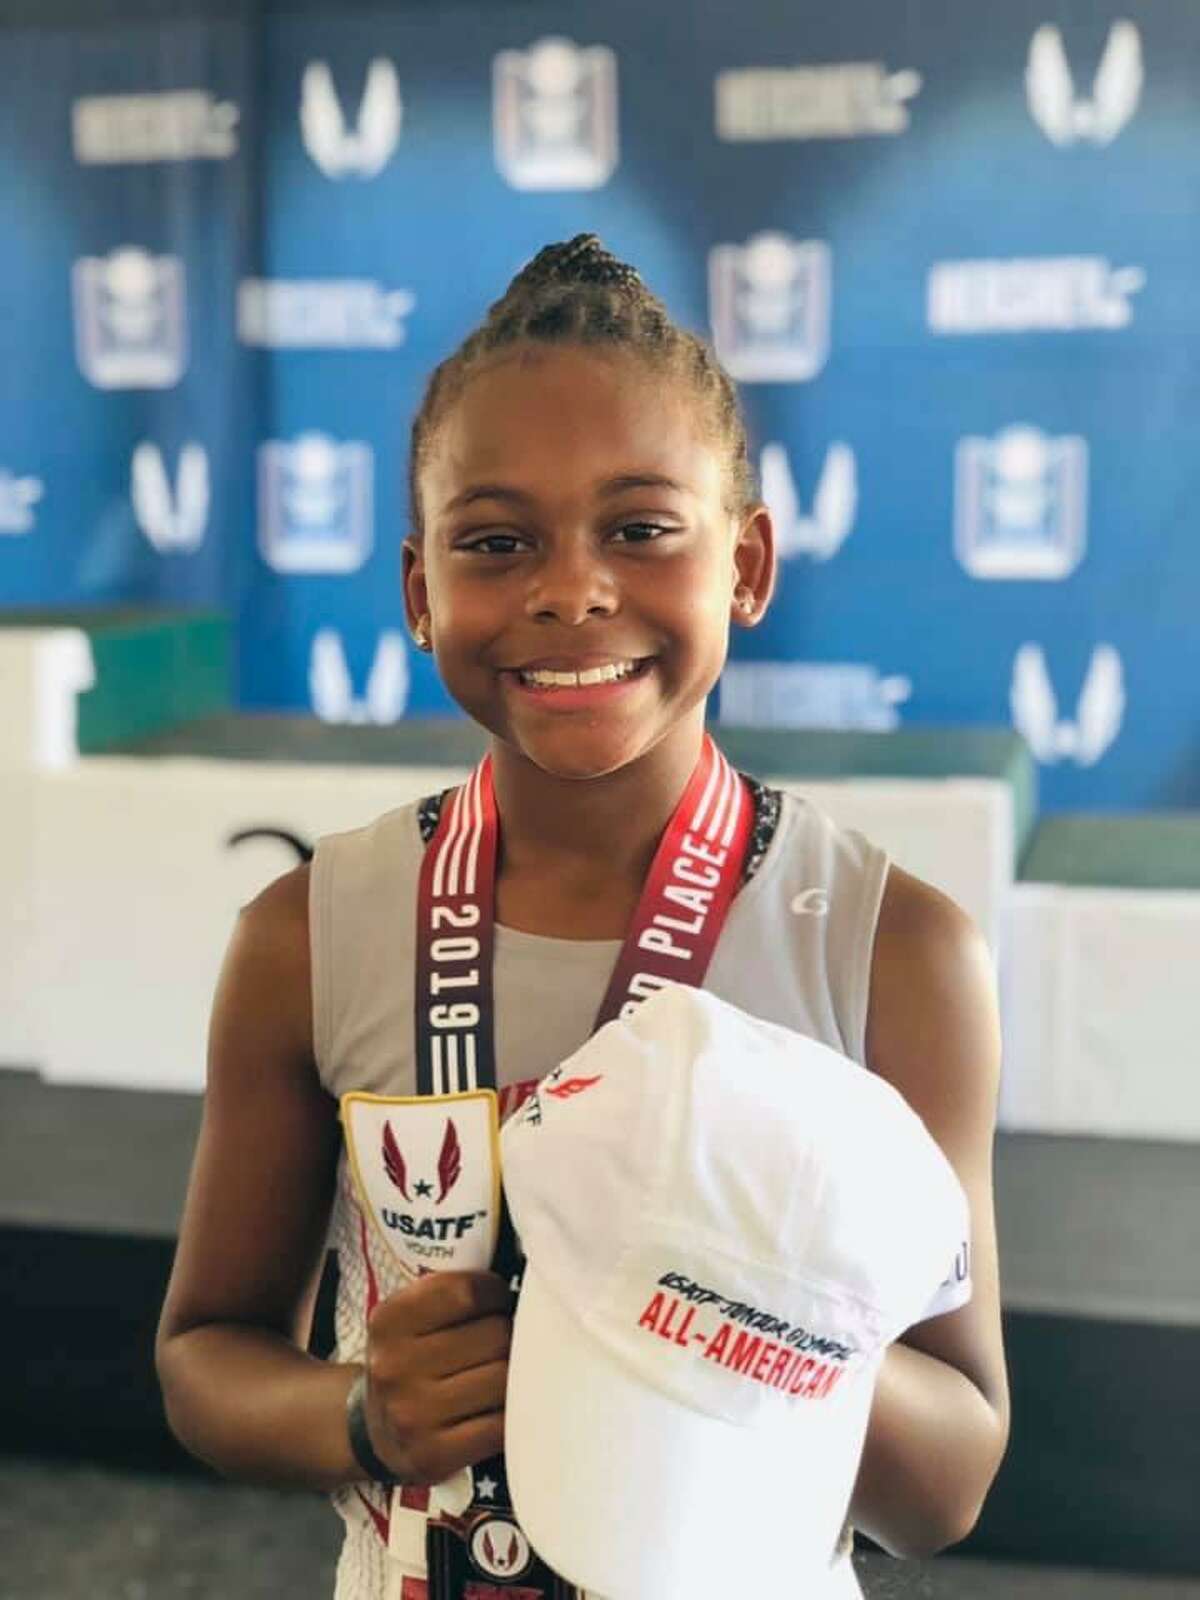 Northwest Flyers Track Club member Jayda Runnels placed third overall in the triathlon at the 2019 Junior Olympics, her first year competing in the event.